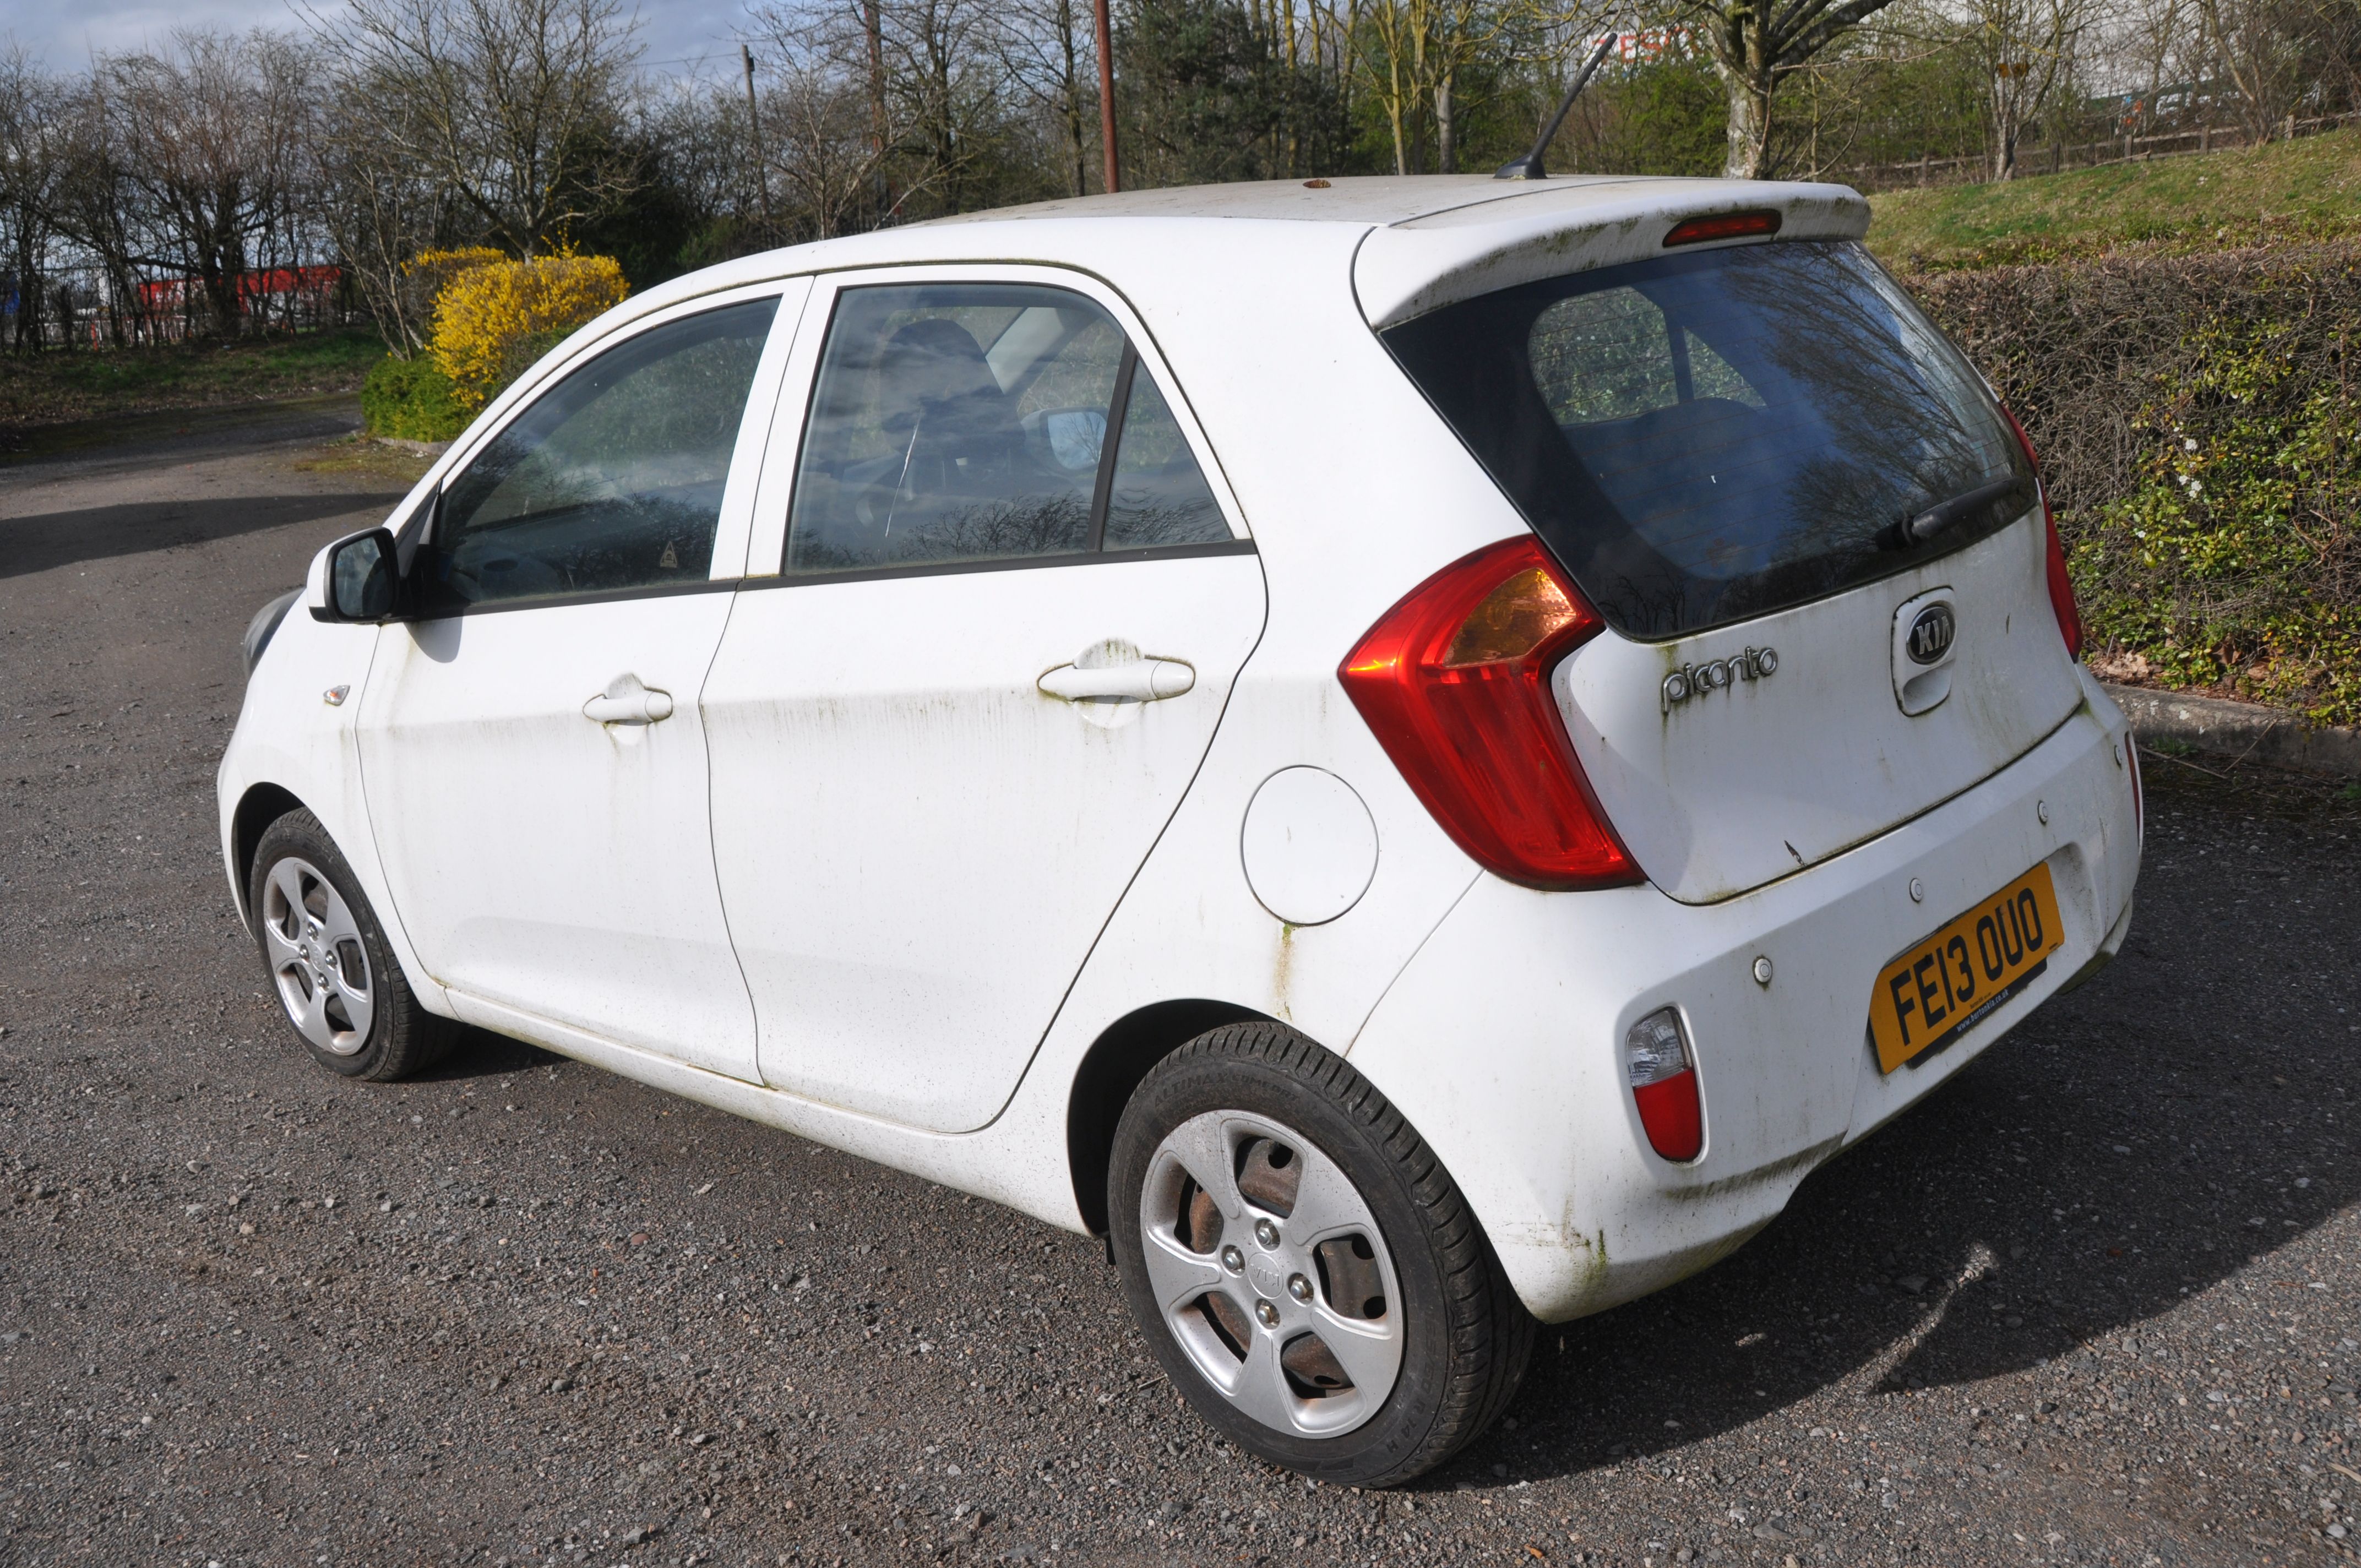 A 2013 KIA PICANTO 5 DOOR HATCHBACK in white, first registered 23/03/2013 under number FE13 OUO, - Image 4 of 8